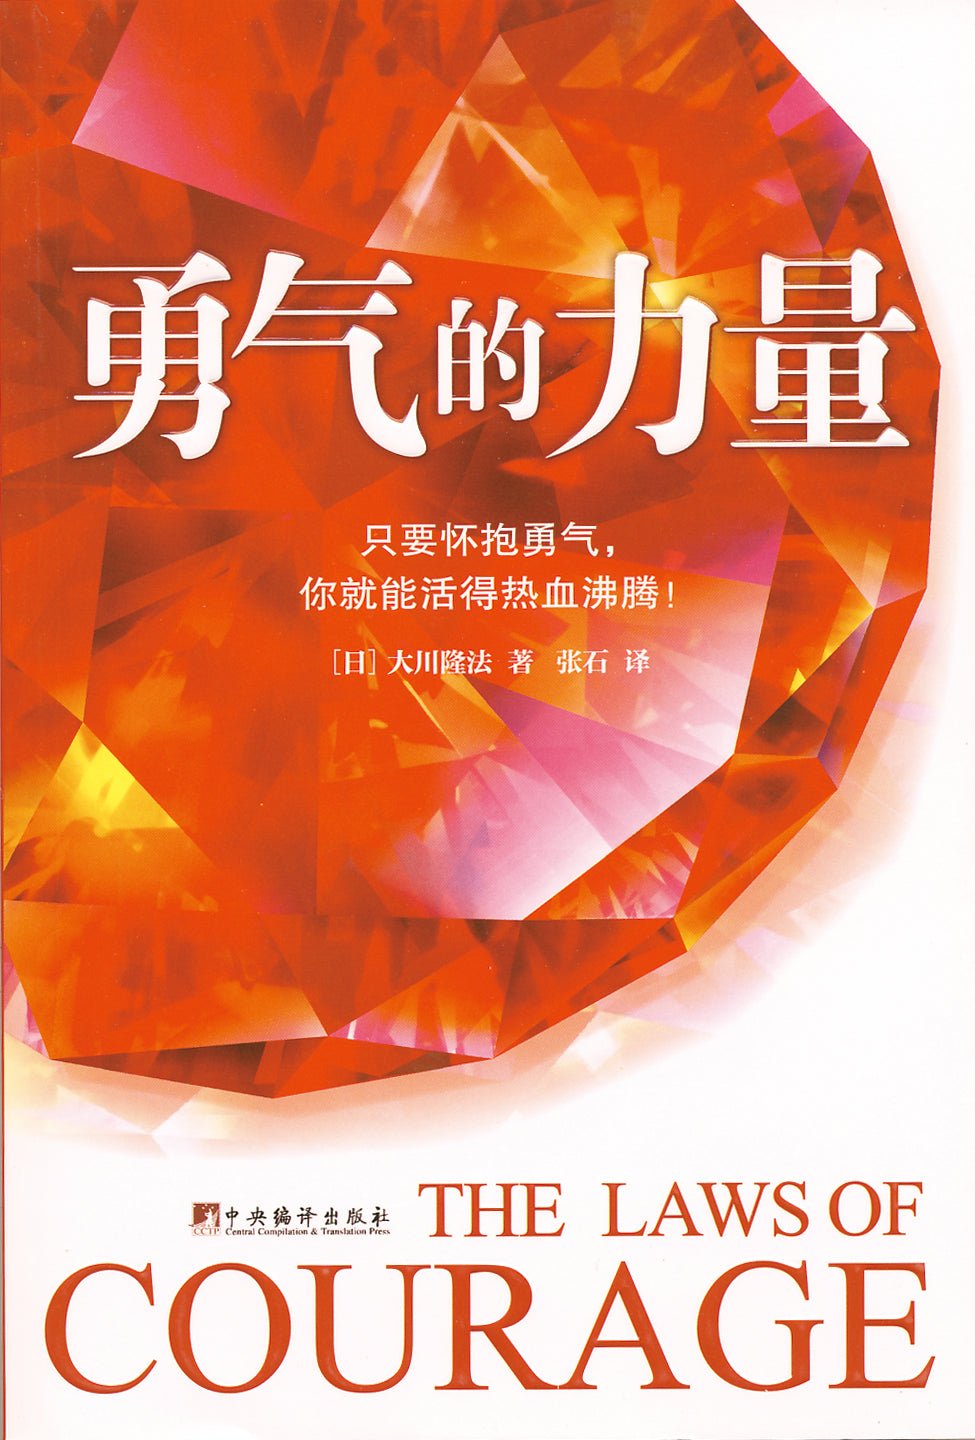 Book, The Laws of Courage -Unleash Your True Potential to Open a Path for the Future, Ryuho Okawa, Chinese Simplified - IRH Press International